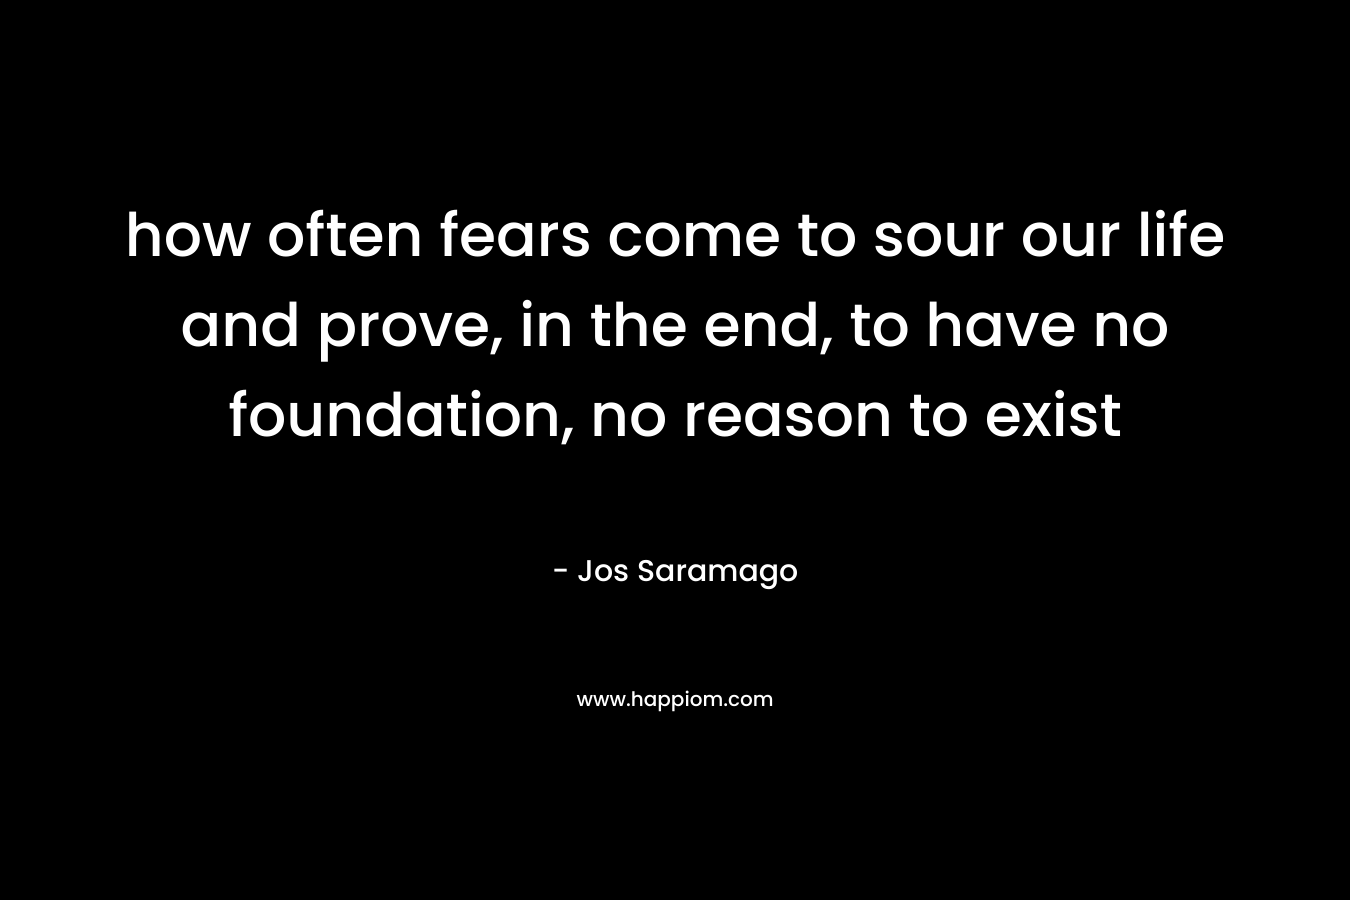 how often fears come to sour our life and prove, in the end, to have no foundation, no reason to exist – Jos Saramago